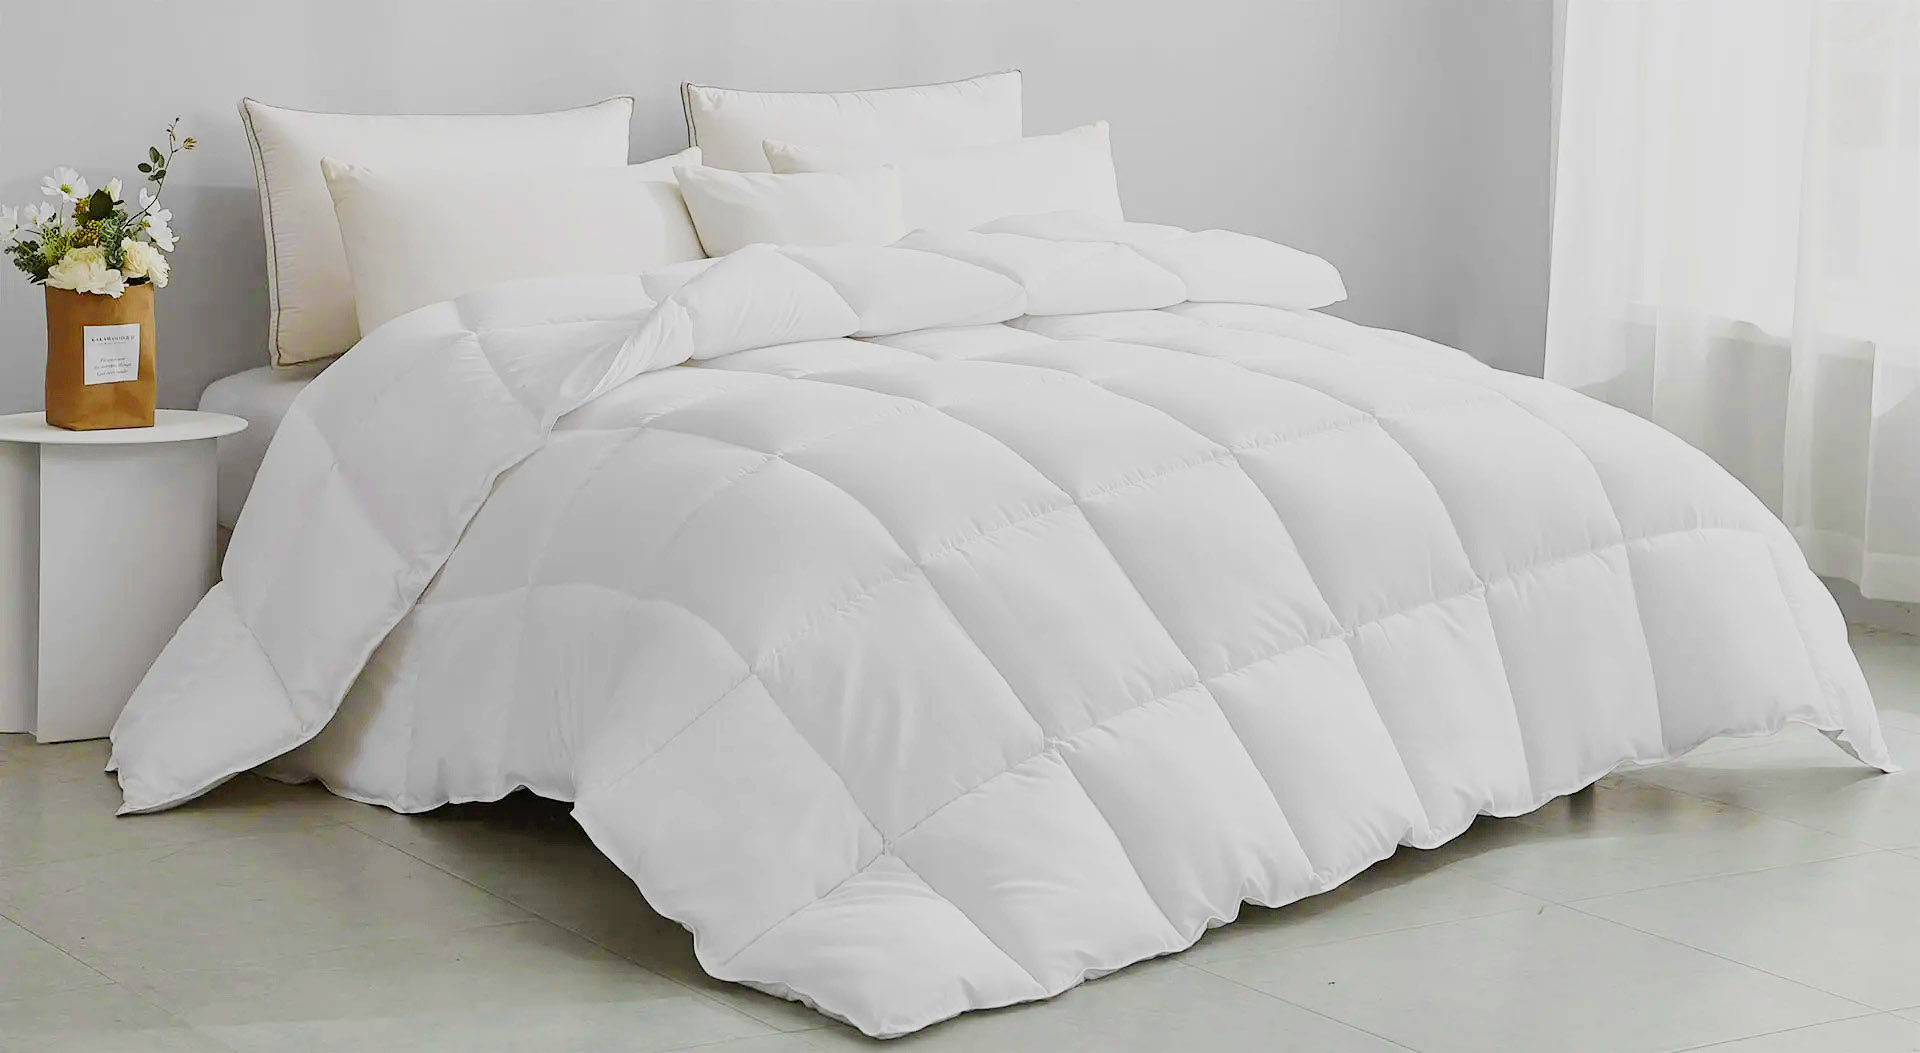 soft-and-comfortable-duvet1